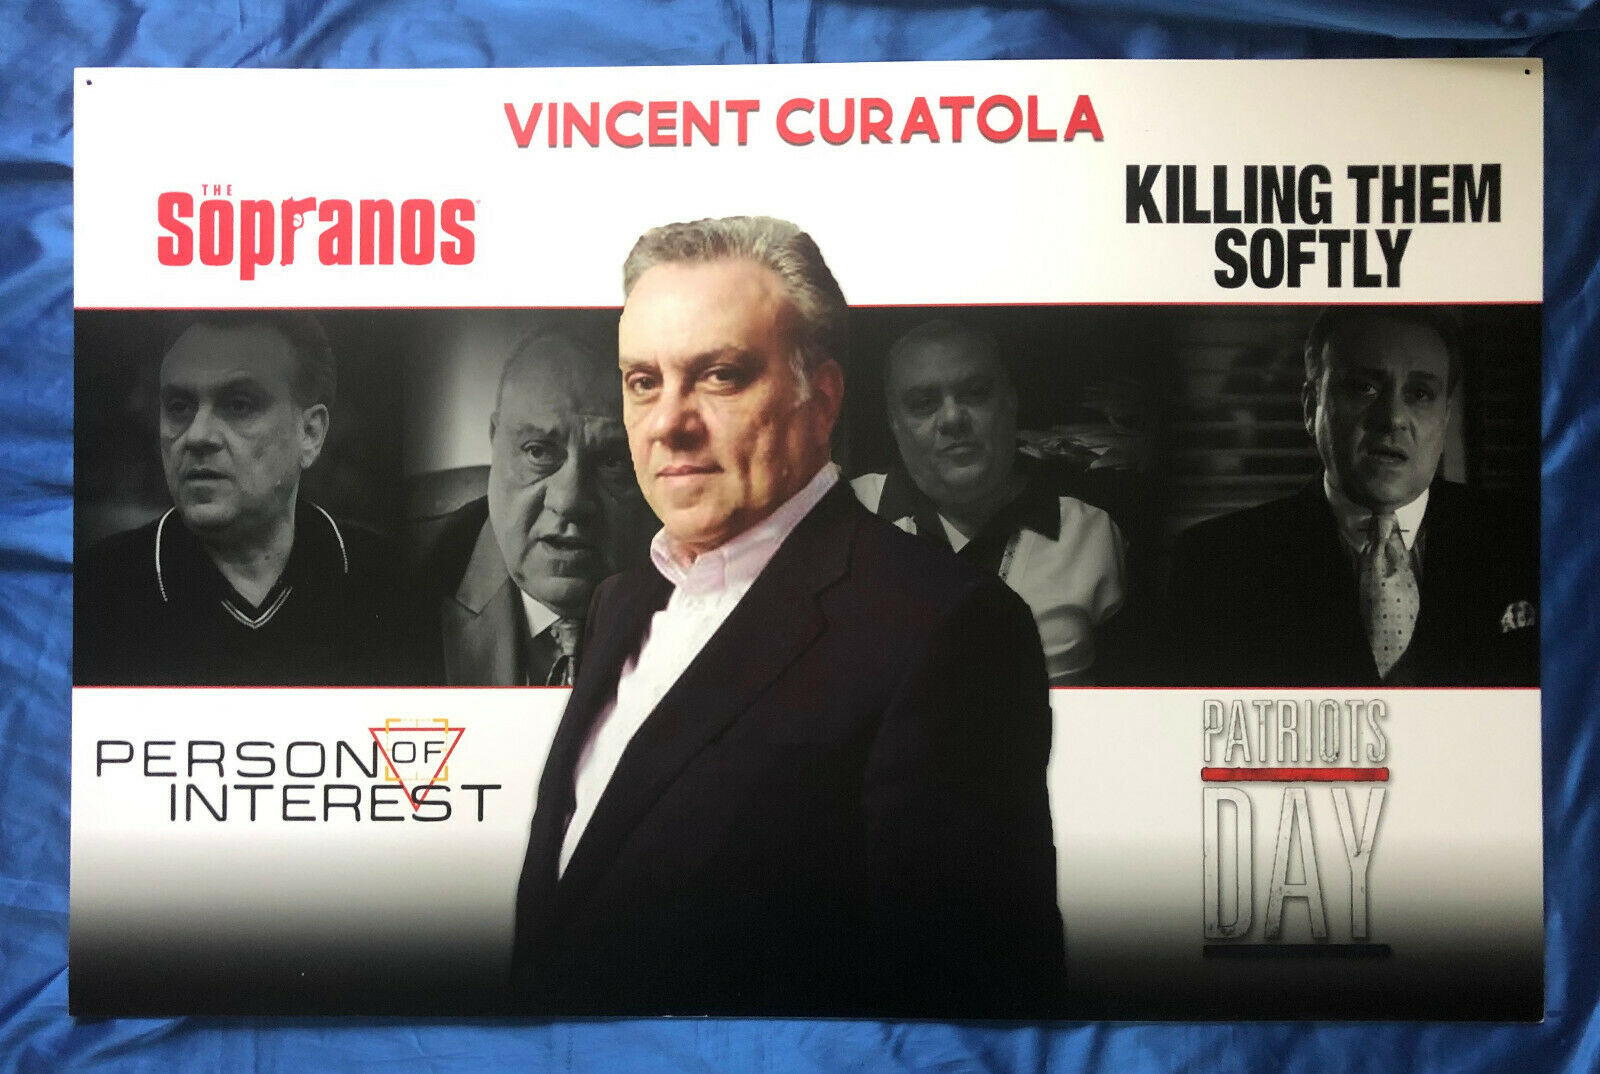 Vincent Curatola (the Sopranos, Patriots Day) Large Sign Poster, Rare